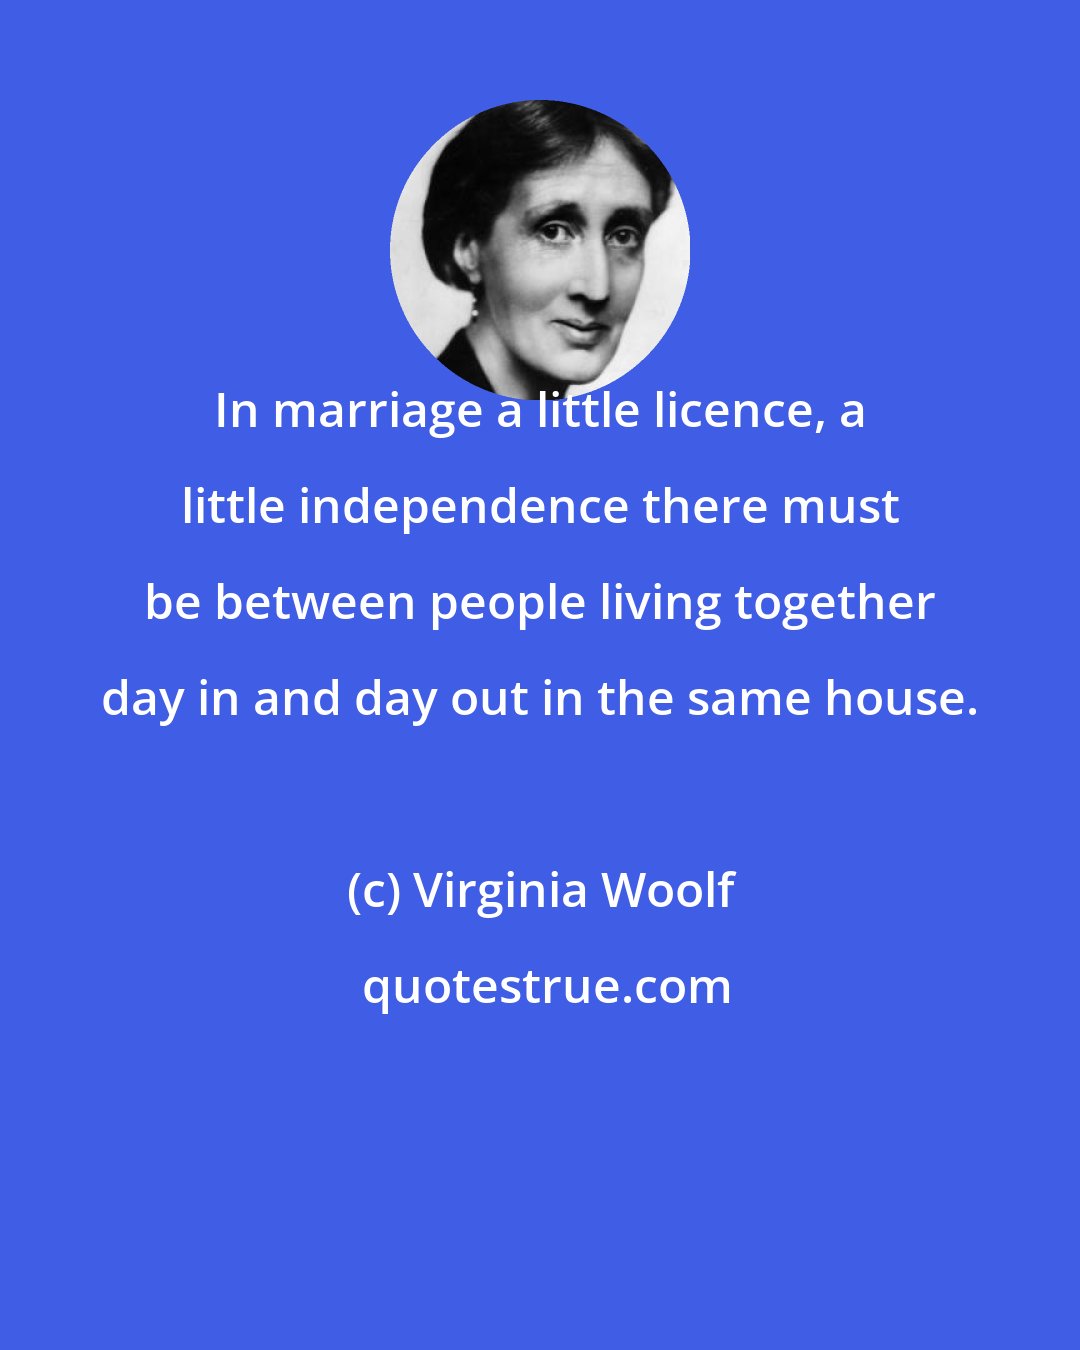 Virginia Woolf: In marriage a little licence, a little independence there must be between people living together day in and day out in the same house.